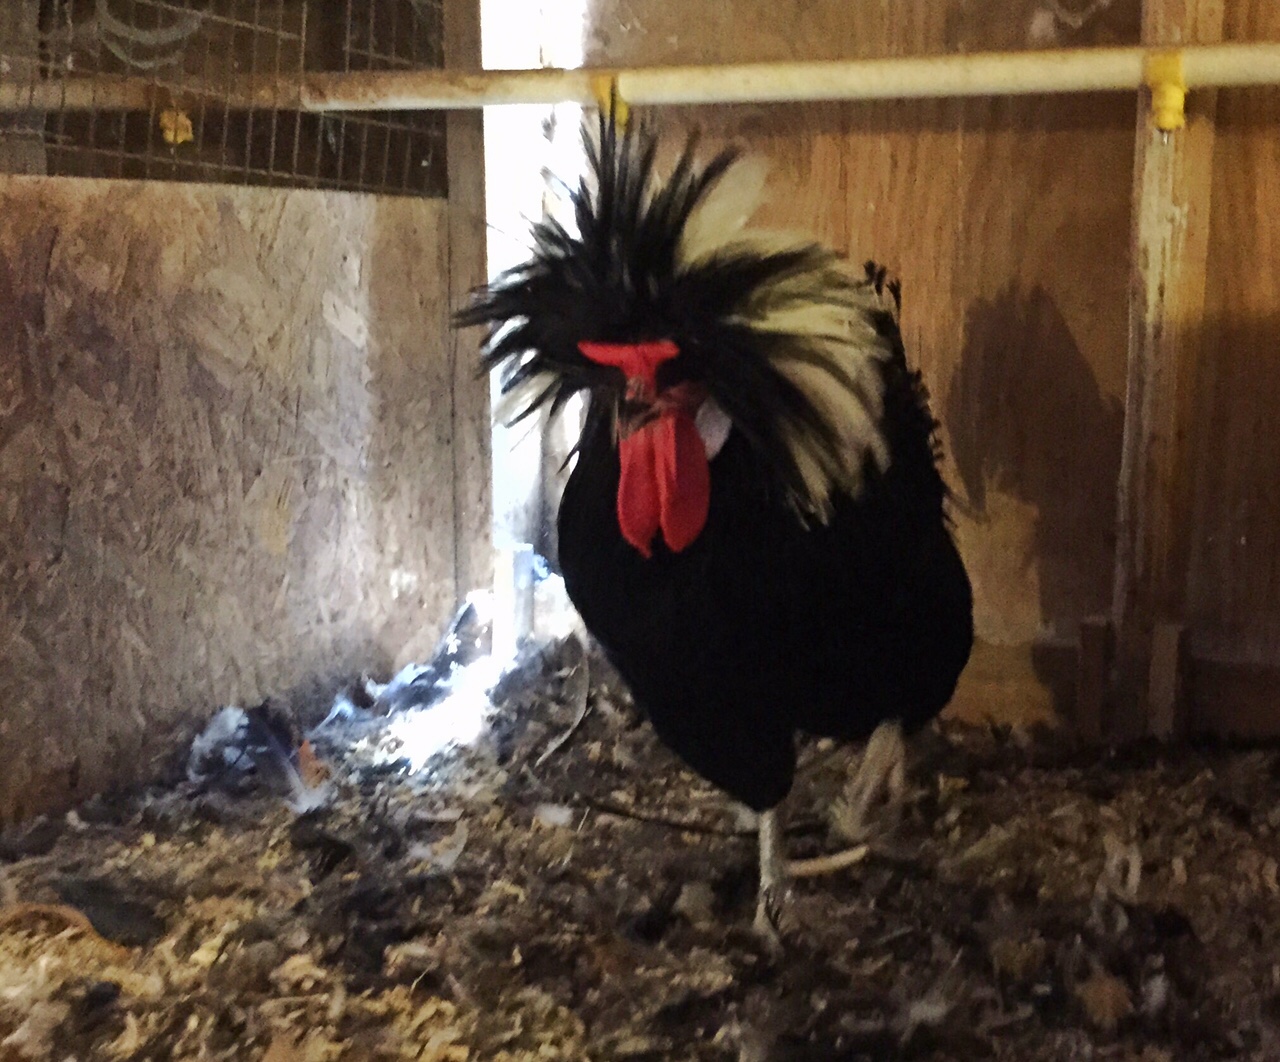 The "showstopper" is a White Crested Black Polish rooster. (WTOP/Kate Ryan)